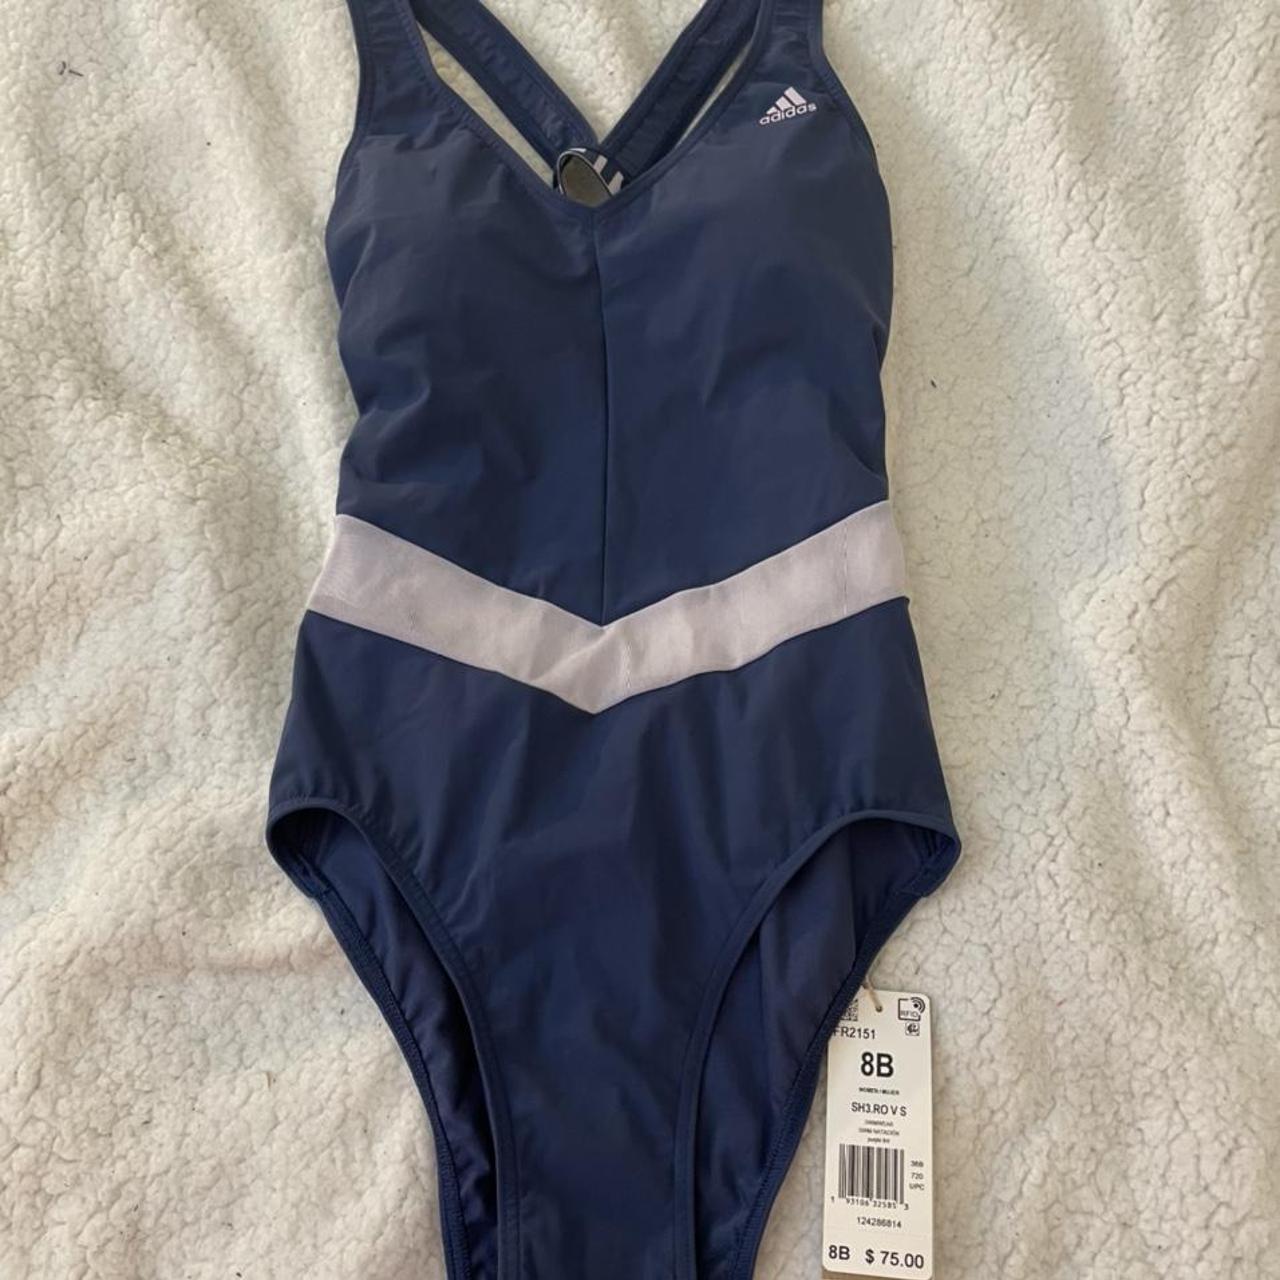 Adidas Women's Navy and Blue Swimsuit-one-piece | Depop